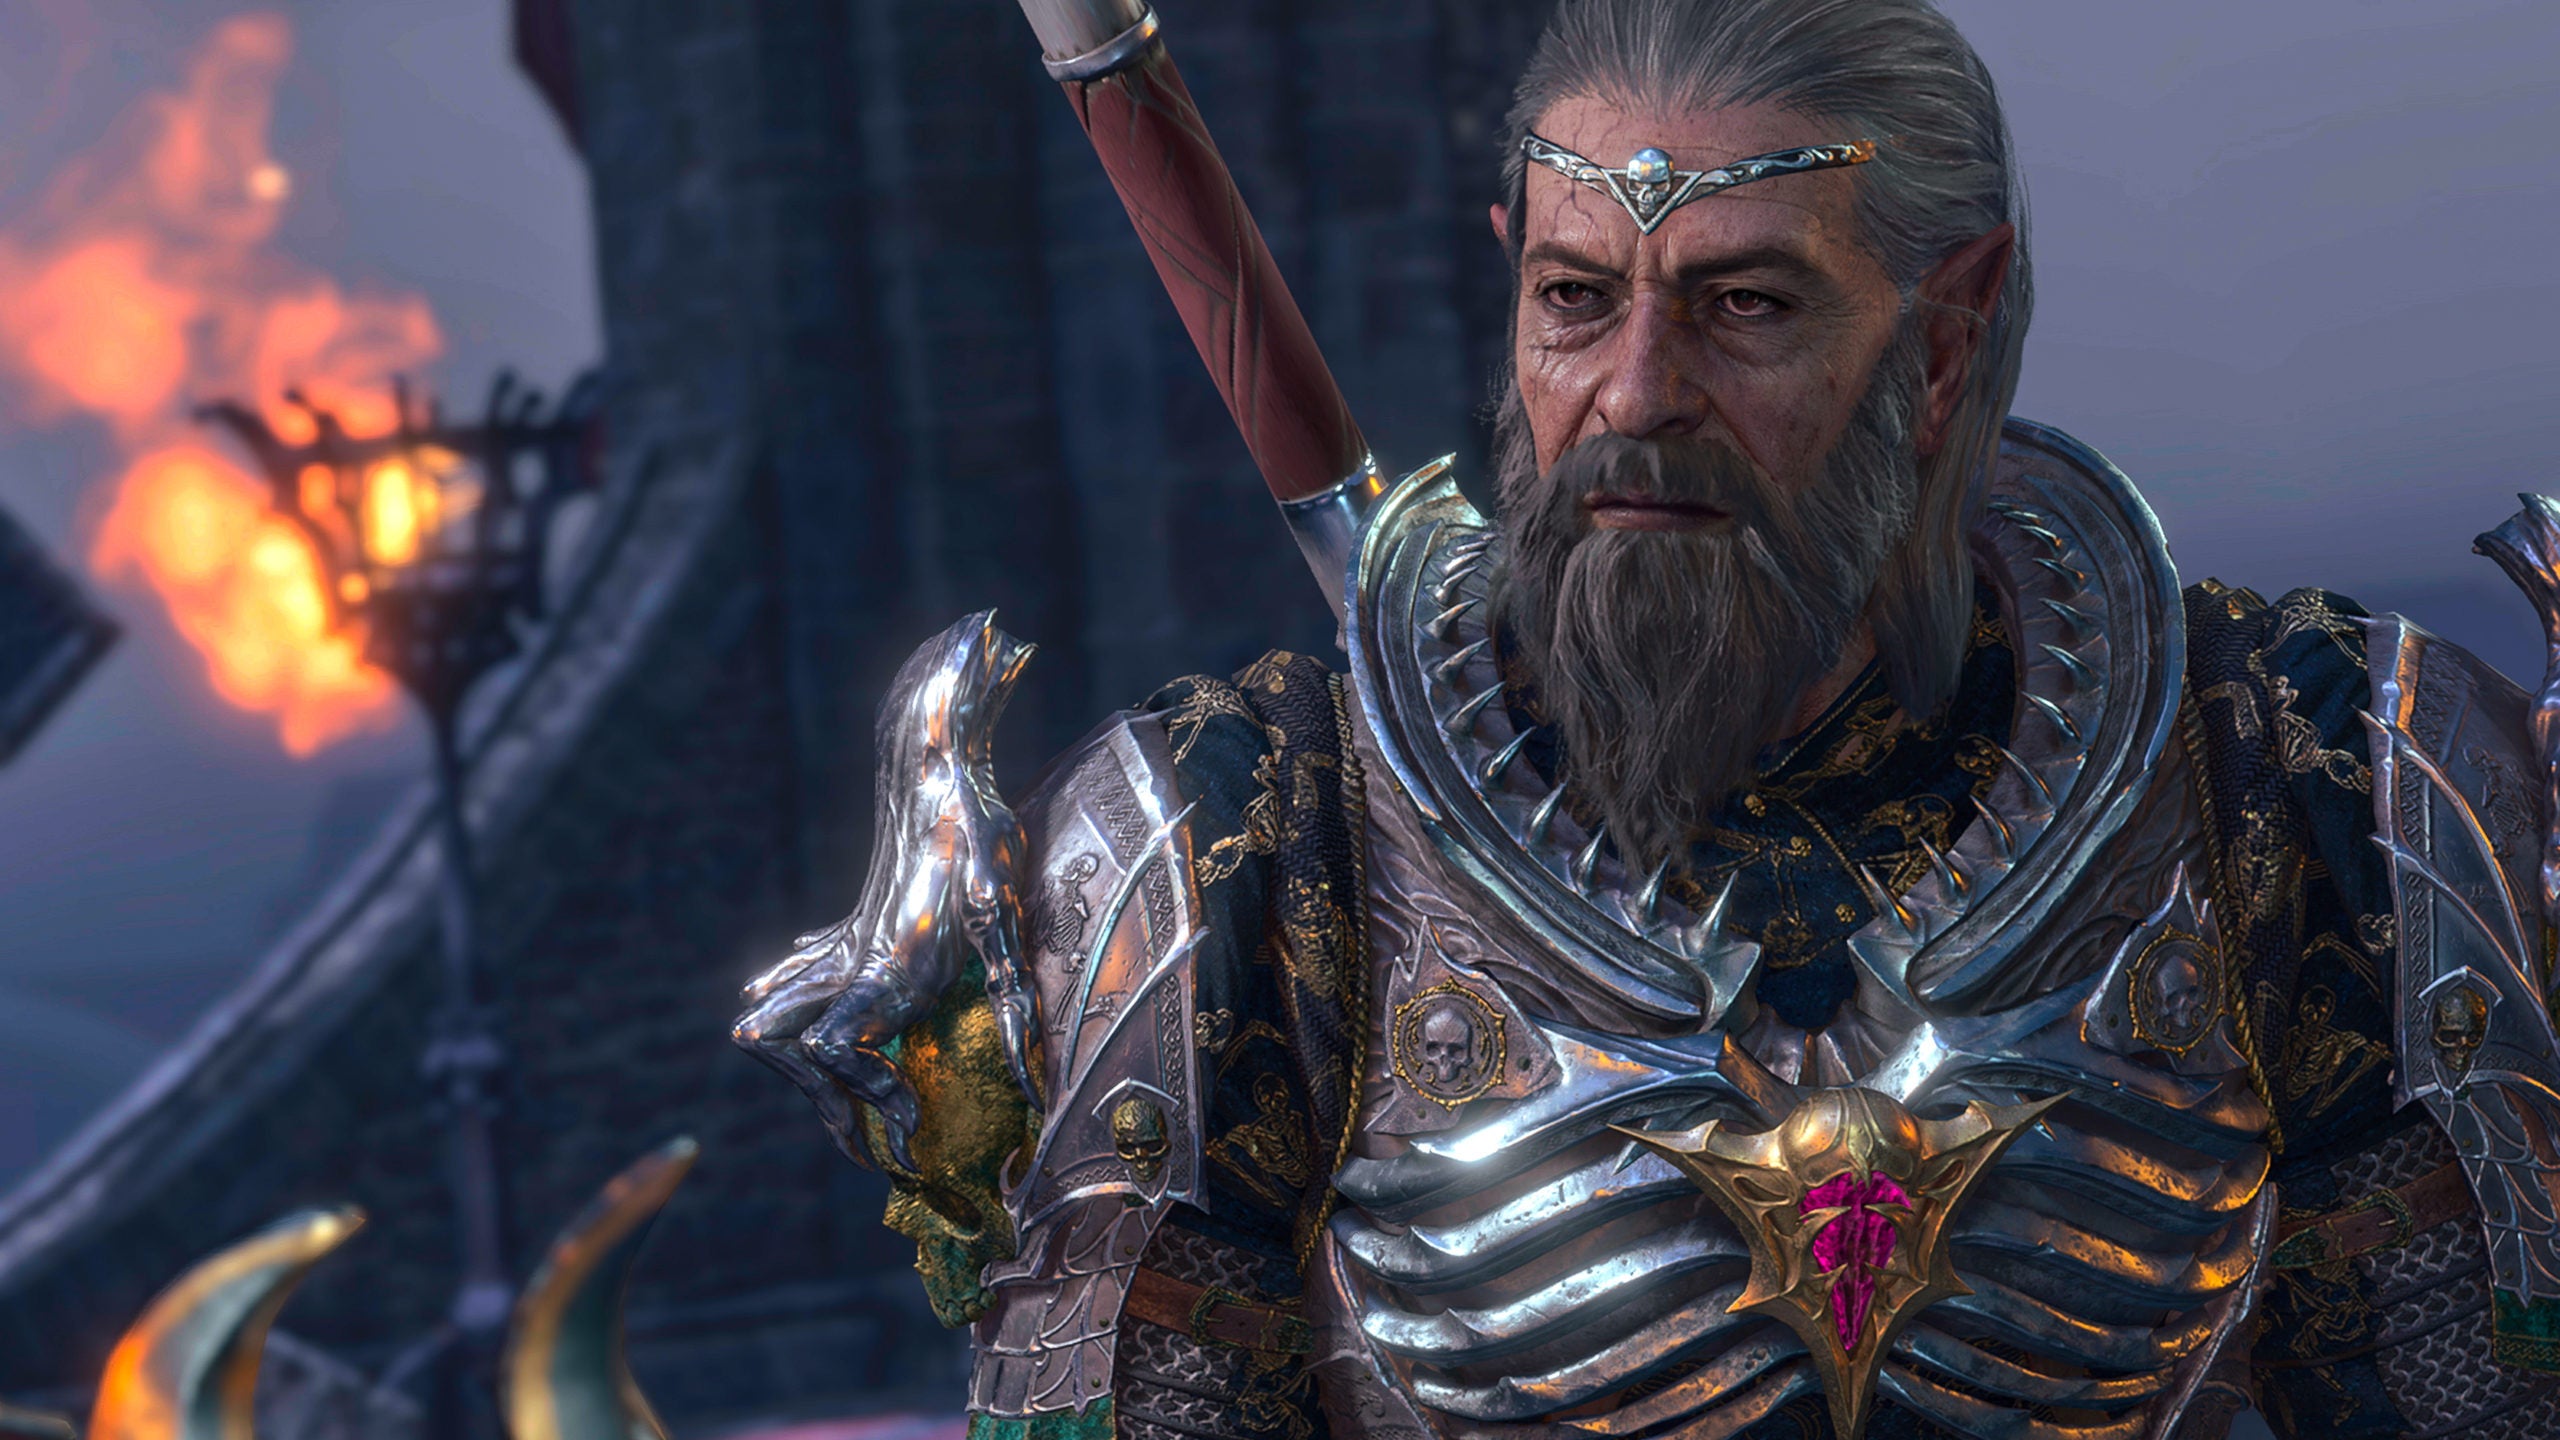 A screenshot of Ketheric Thorm, a necromancer with a greying beard in impressive evil looking armour. He's an antagonist in Baldur's Gate 3